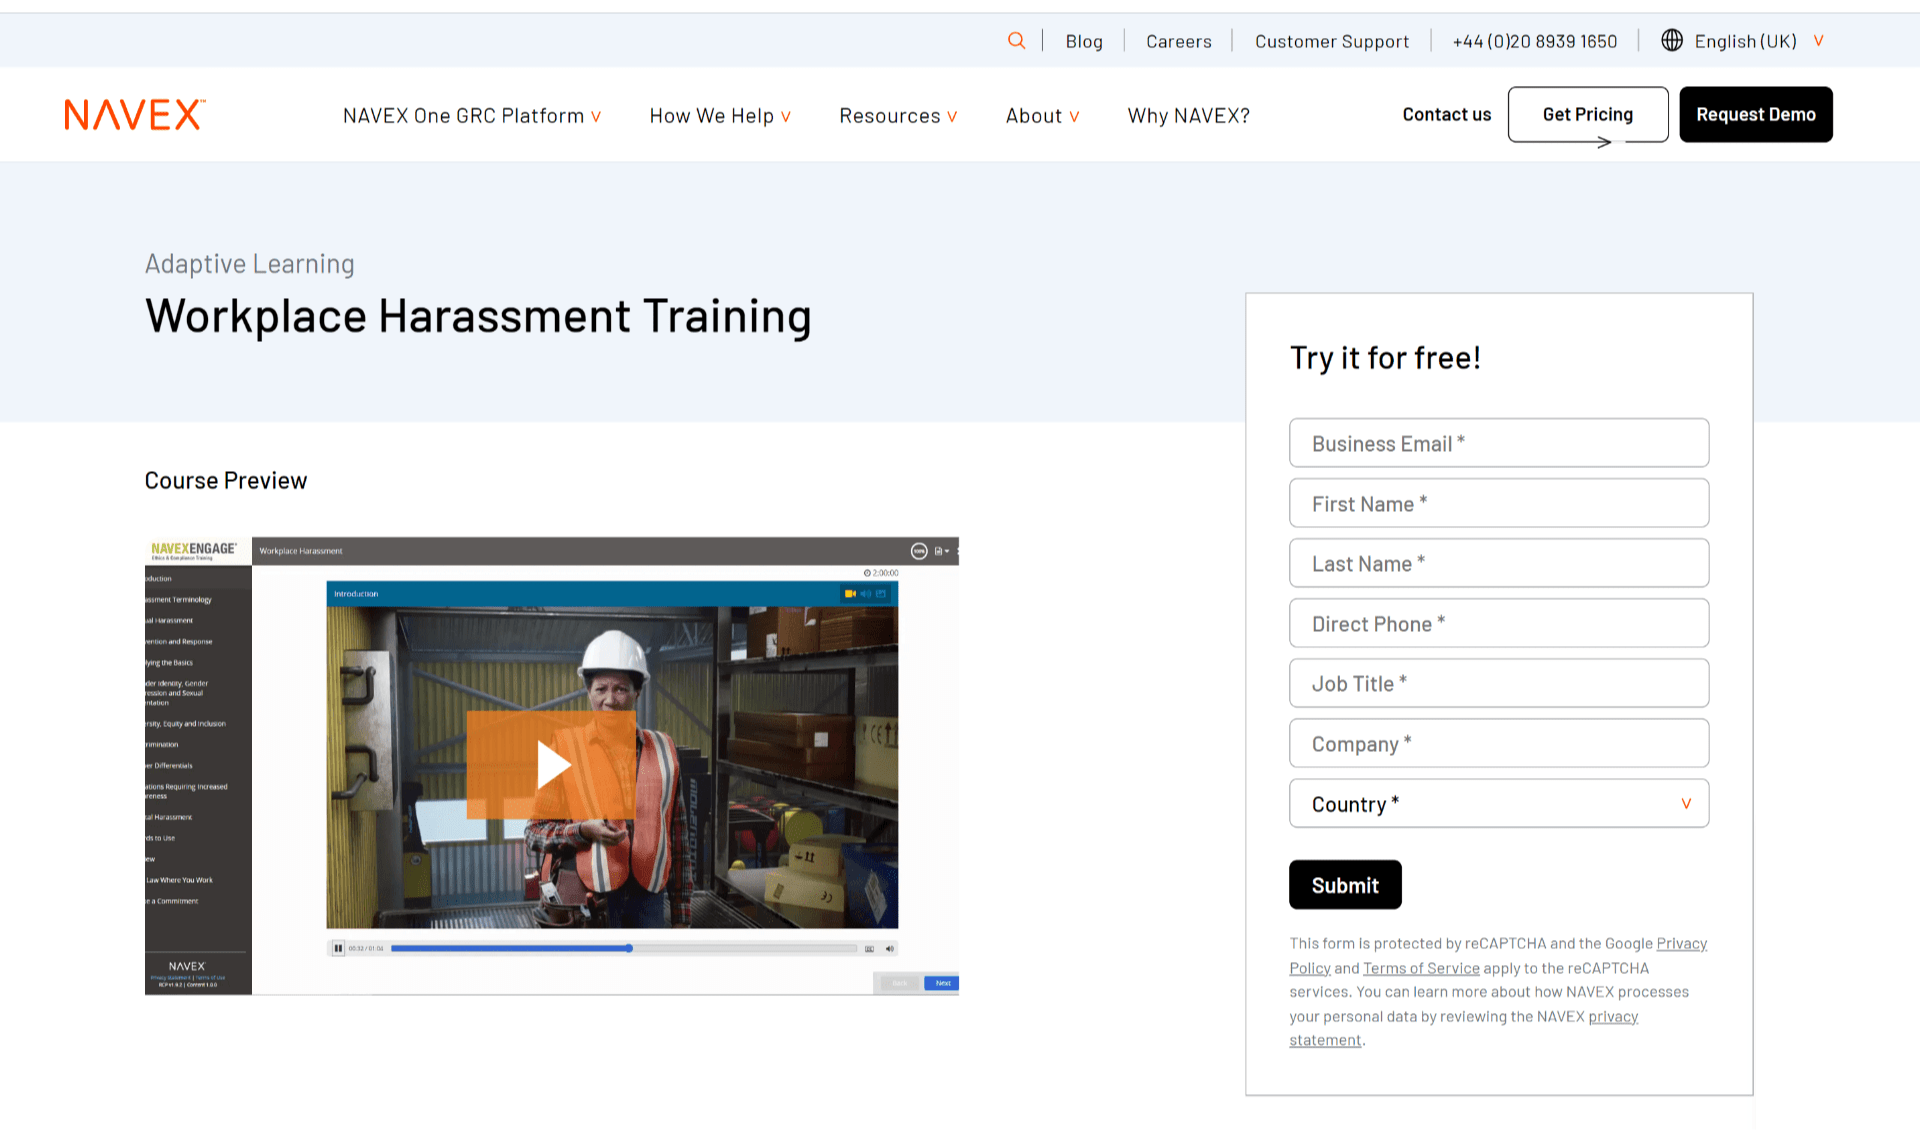 NAVEX’s Workplace Harassment Training